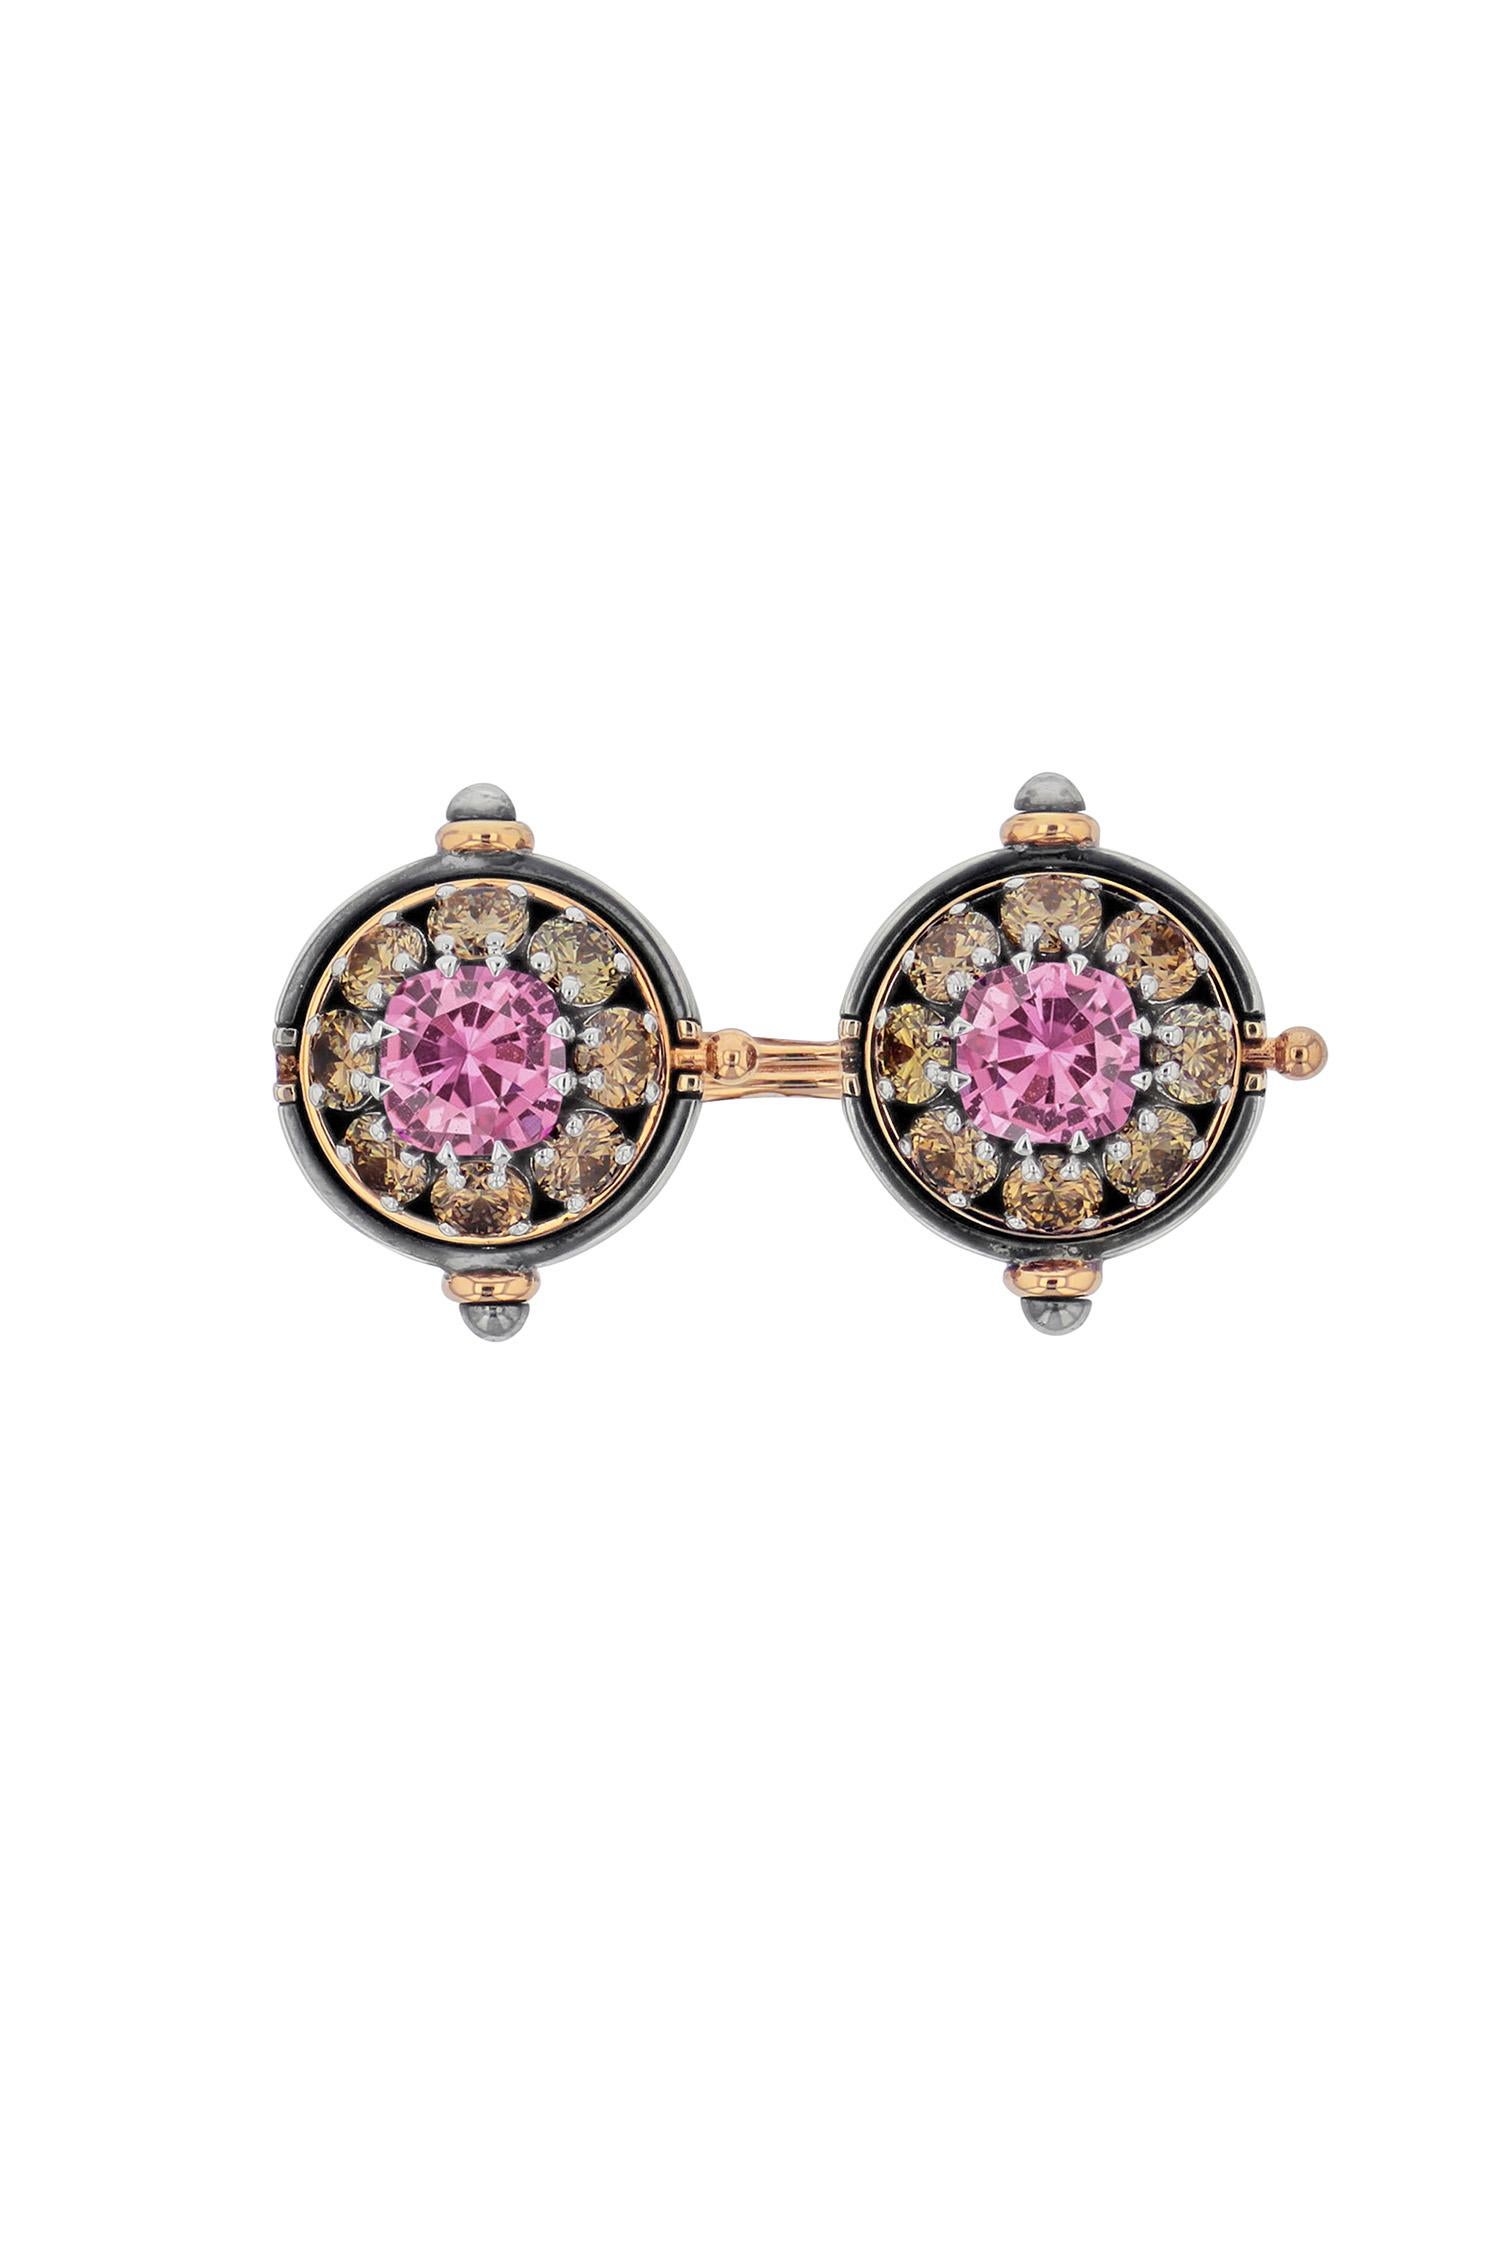 Cushion Cut Pink Sapphire & Diamonds Sirius Toi&Moi Ring in 18k Rose Gold by Elie Top For Sale